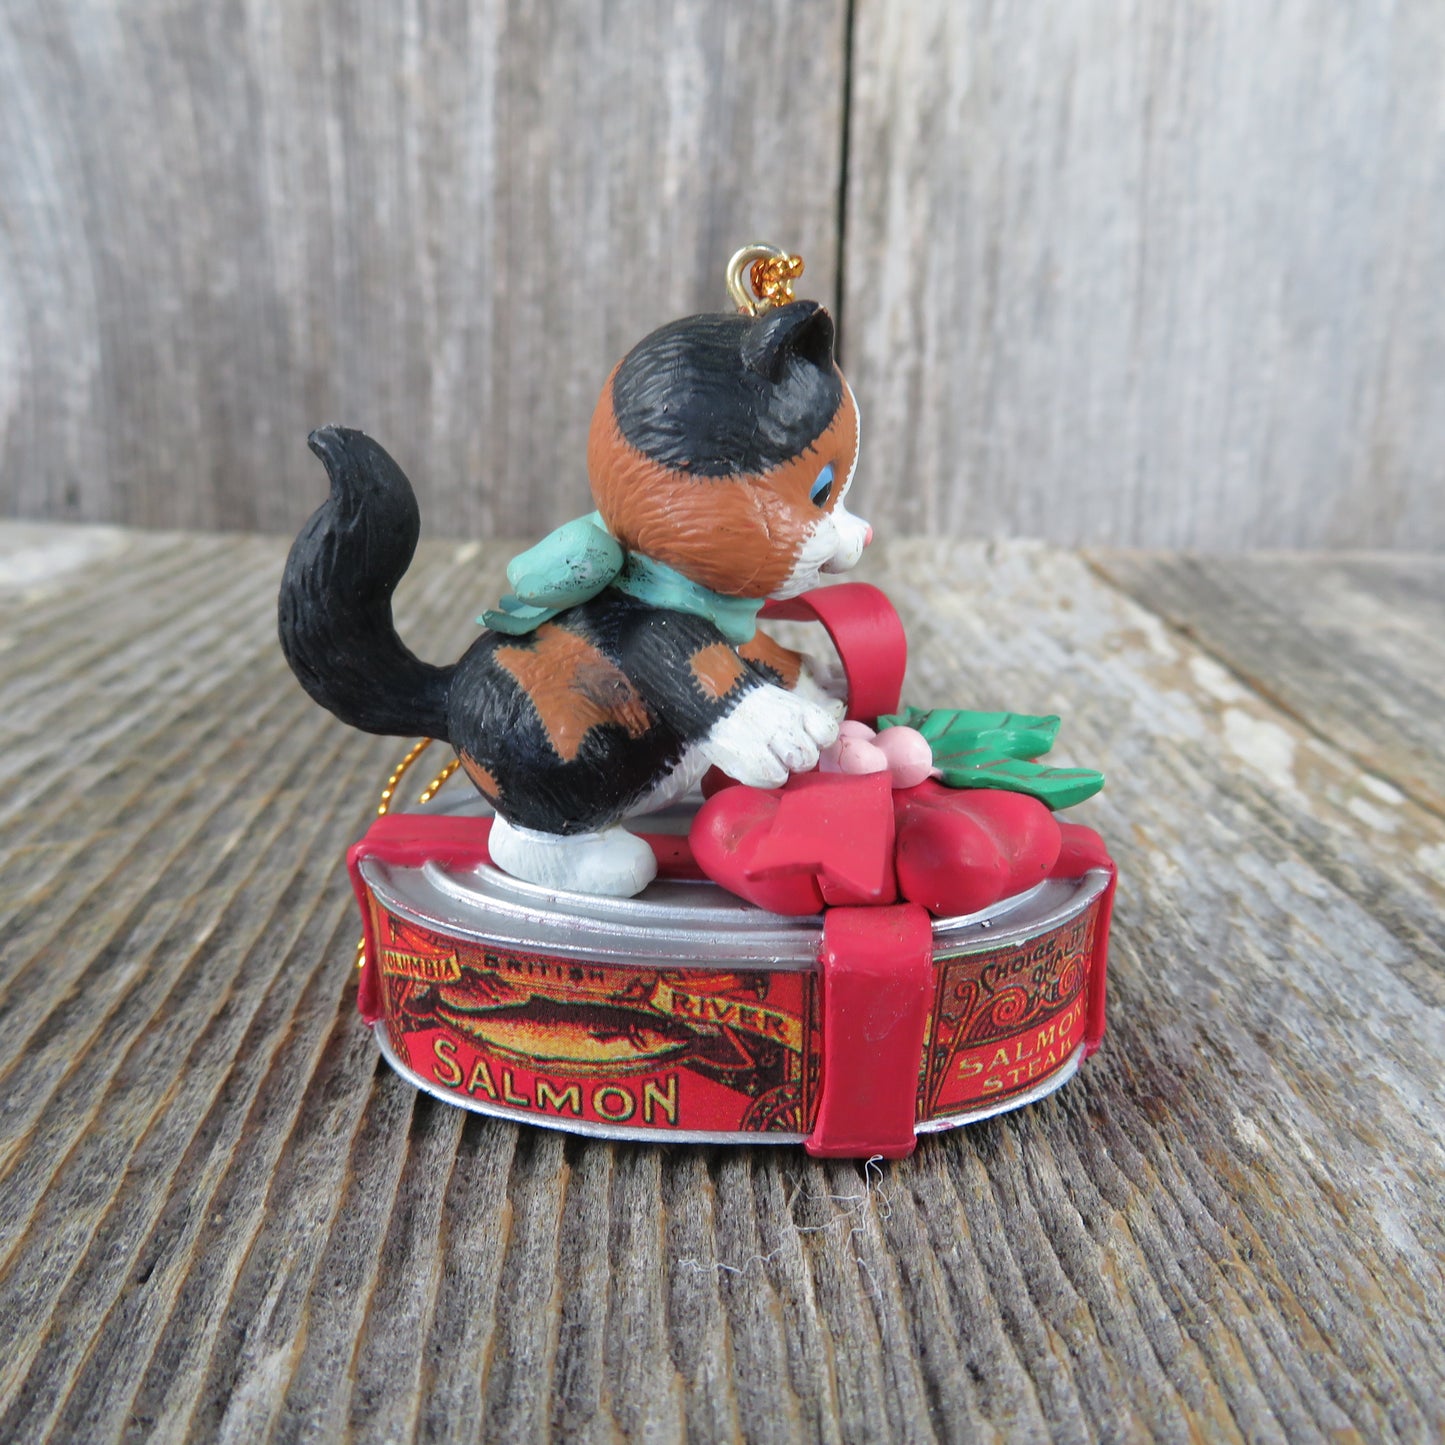 Vintage Cat on Canned Fish Gift Ornament Bow Salmon Christmas Calico Kitten Kitty Lustre Fame 1992 - At Grandma's Table